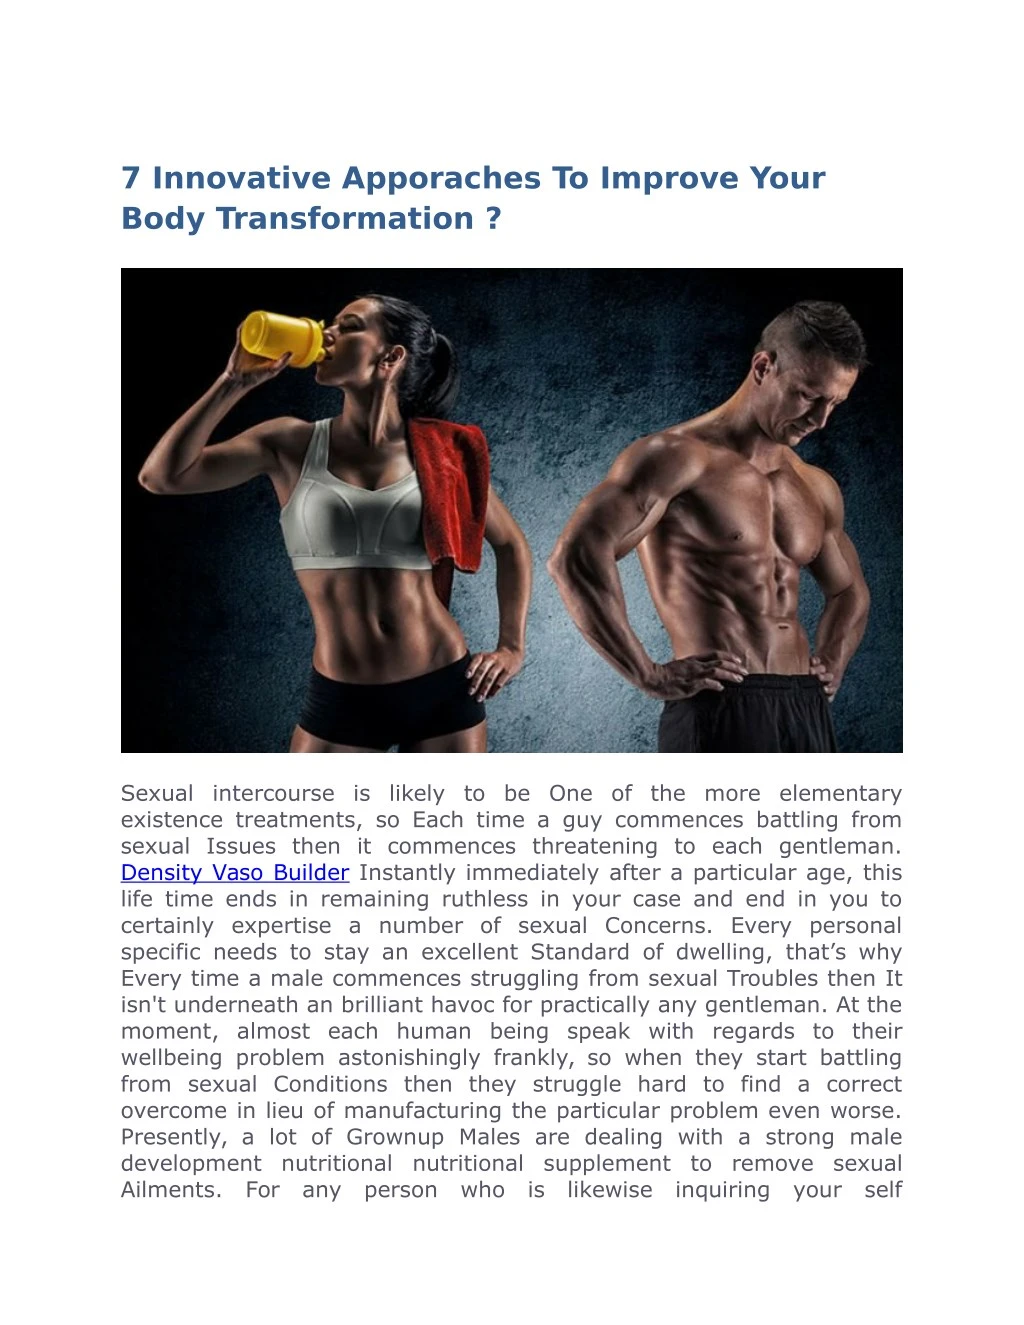 7 innovative apporaches to improve your body